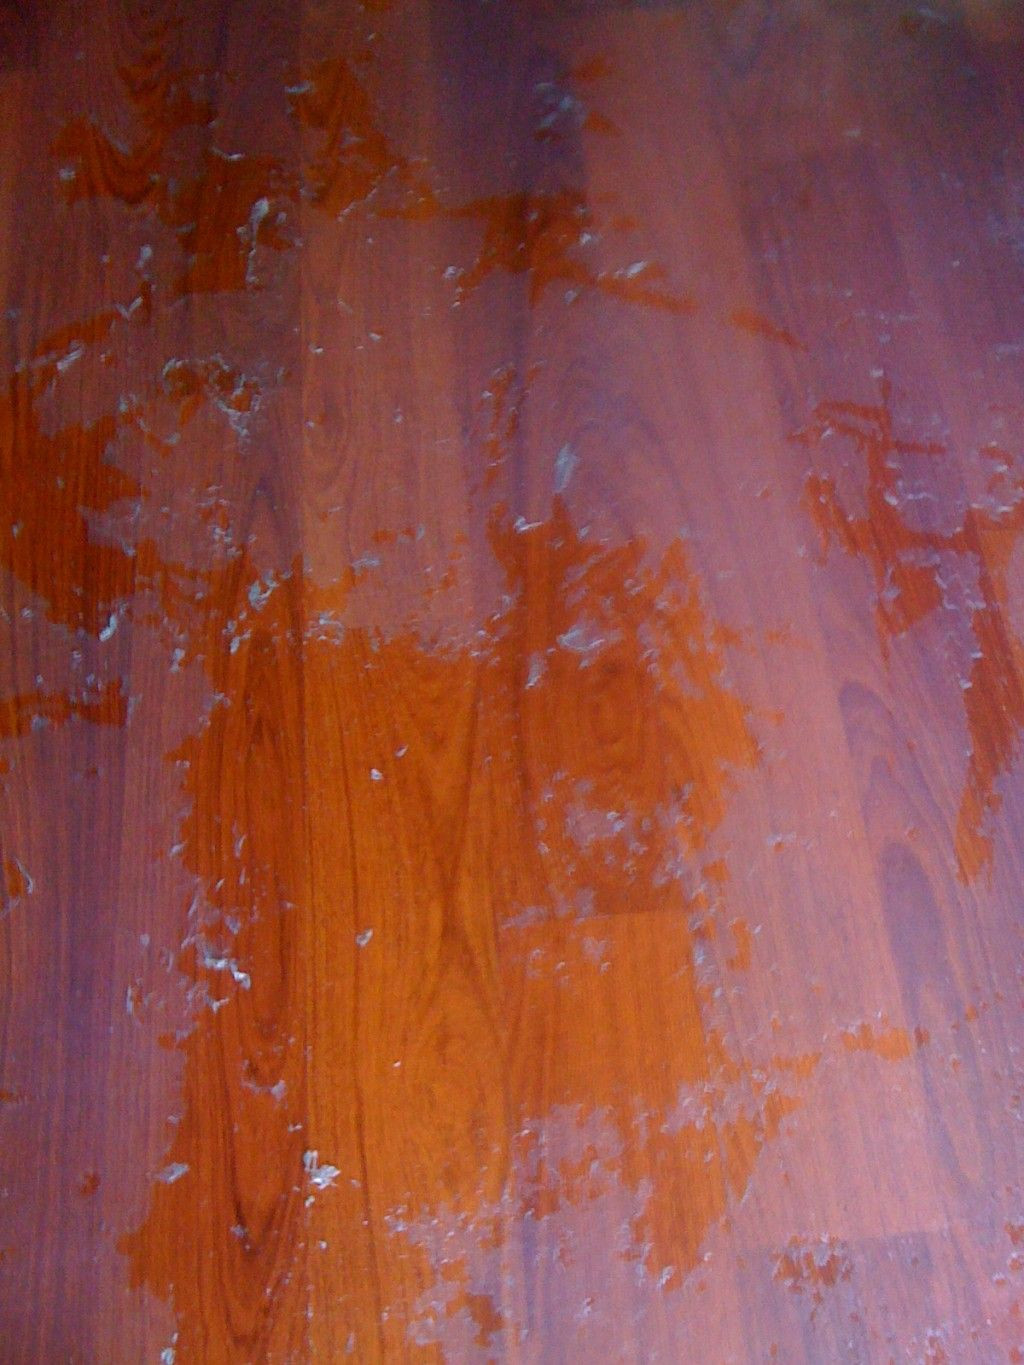 candle wax on hardwood floor of how to remove wax and oil soap cleaners from wood floors recipes intended for how to remove oily or wax build up from cleaning or polishing solutions from wood floors